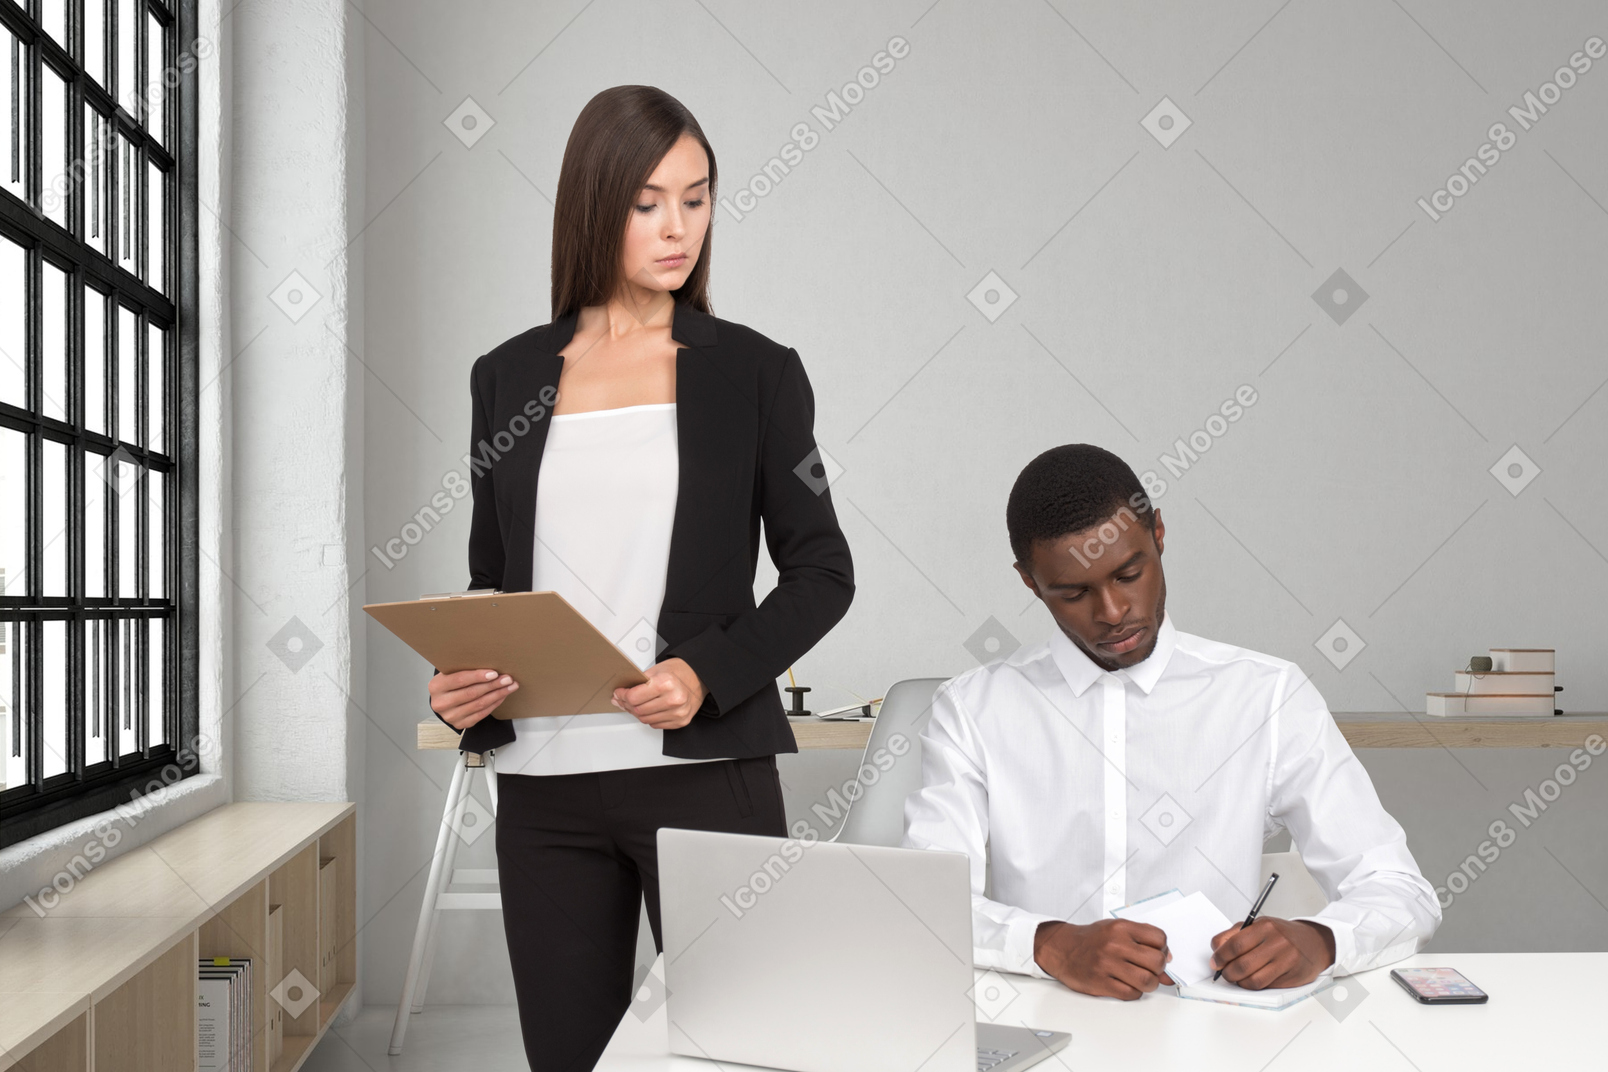 A woman in a business suit standing next to a man working on a laptop